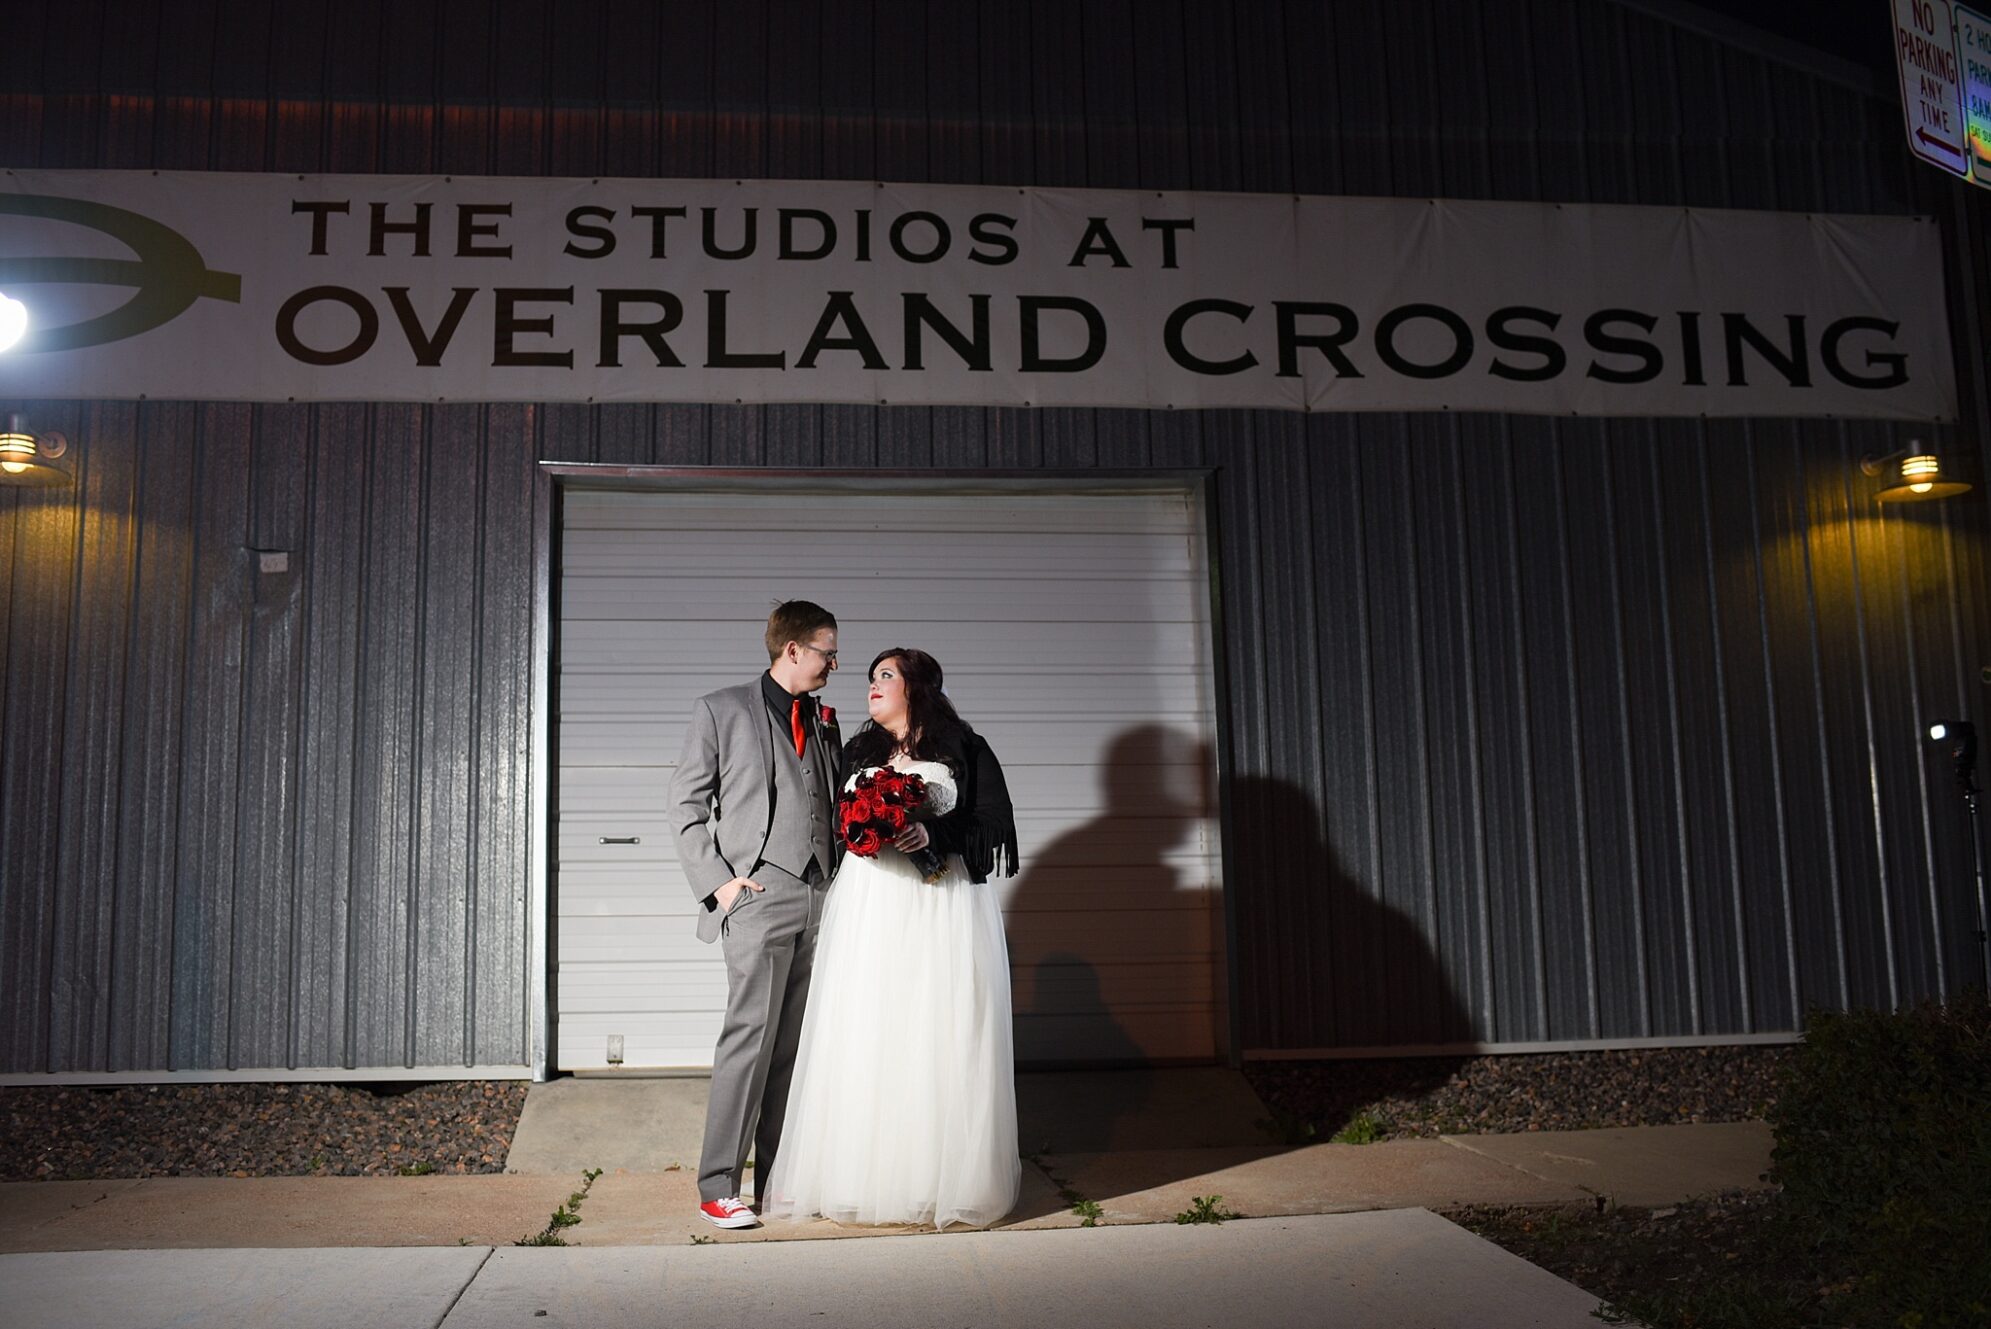 Alecia & Nick's Rock 'N Roll Themed Wedding at The Studios at Overland Crossing, The Studios at Overland Crossing, The Studios, Overland Crossing, Denver Wedding Photographer, Denver Wedding, Downtown Denver Wedding, Yellow Wall, Rock N Roll Wedding, Rock Wedding